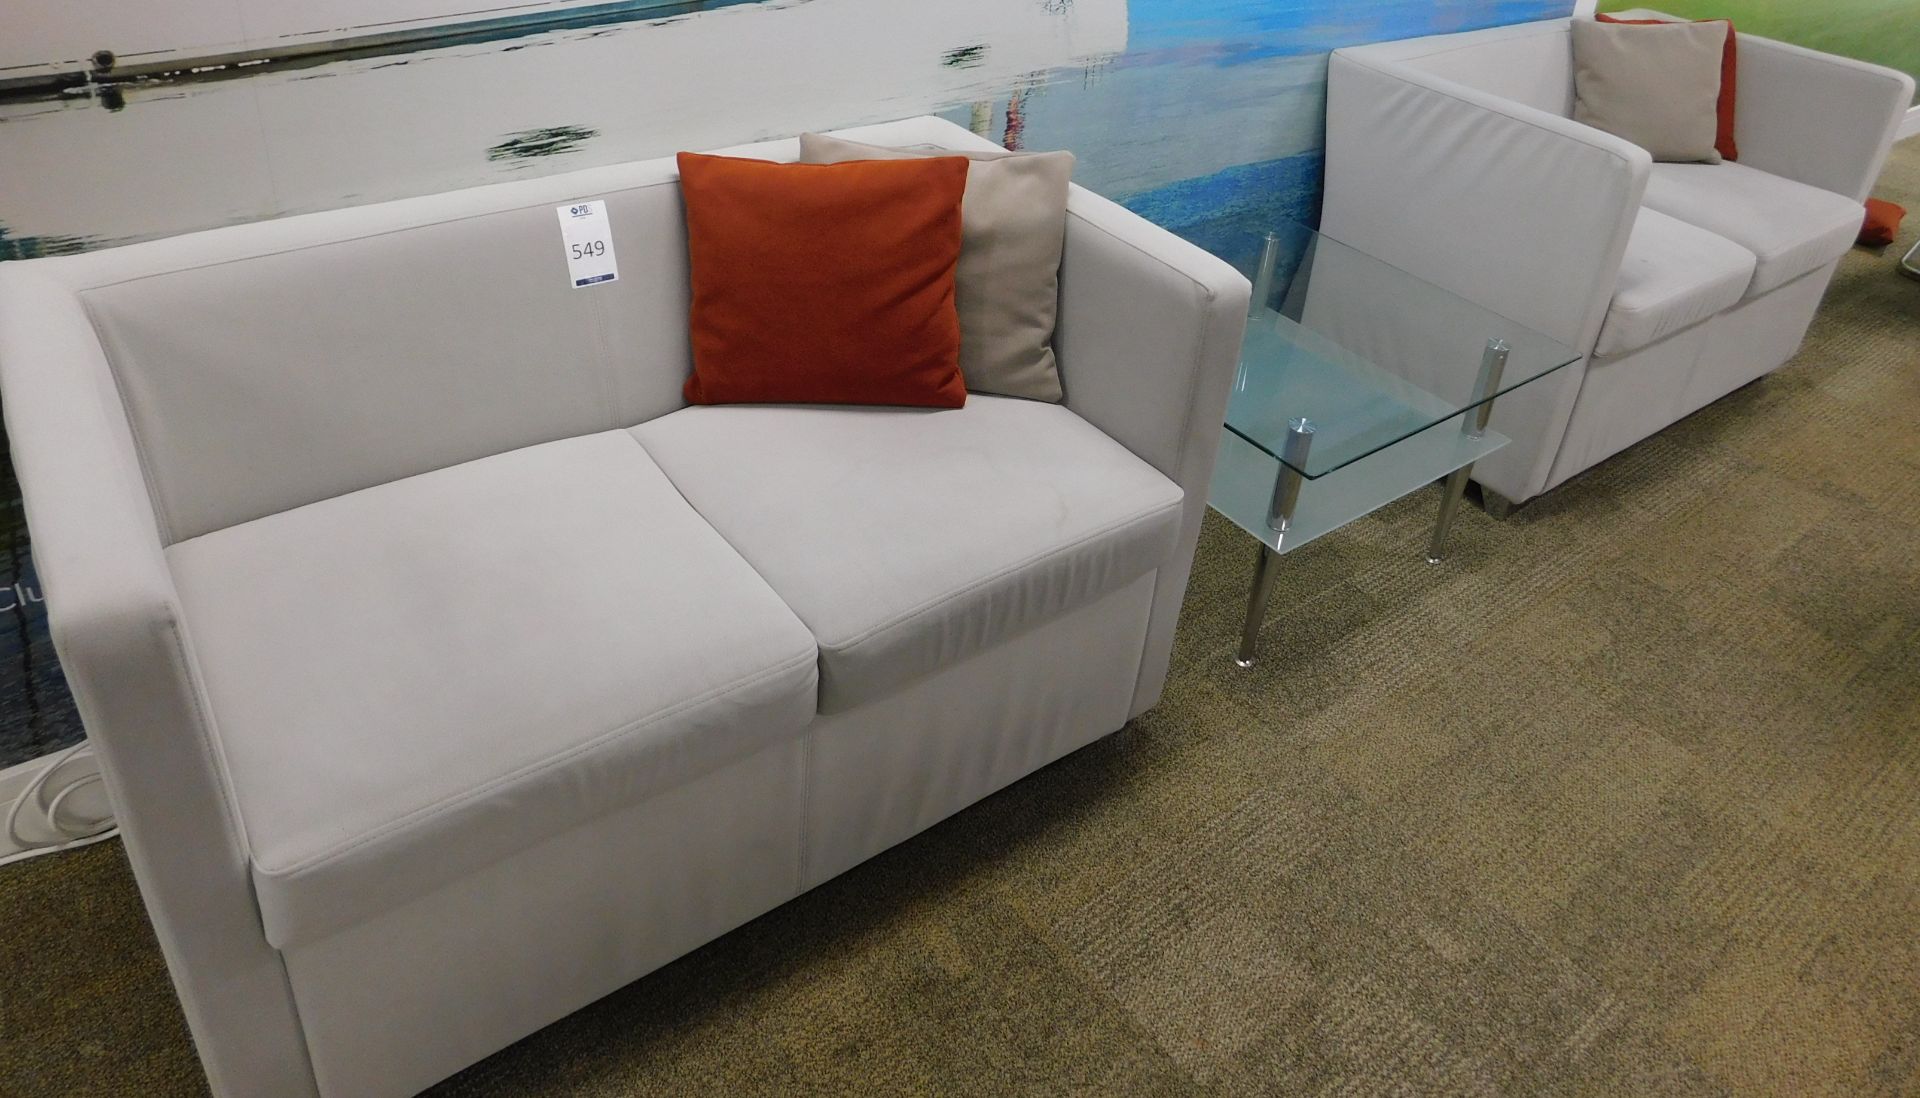 2 Jack Twin Seat Sofas, 120cm x 65cm, a Plate Glass Coffee Table & 4 Scatter Cushions (Located